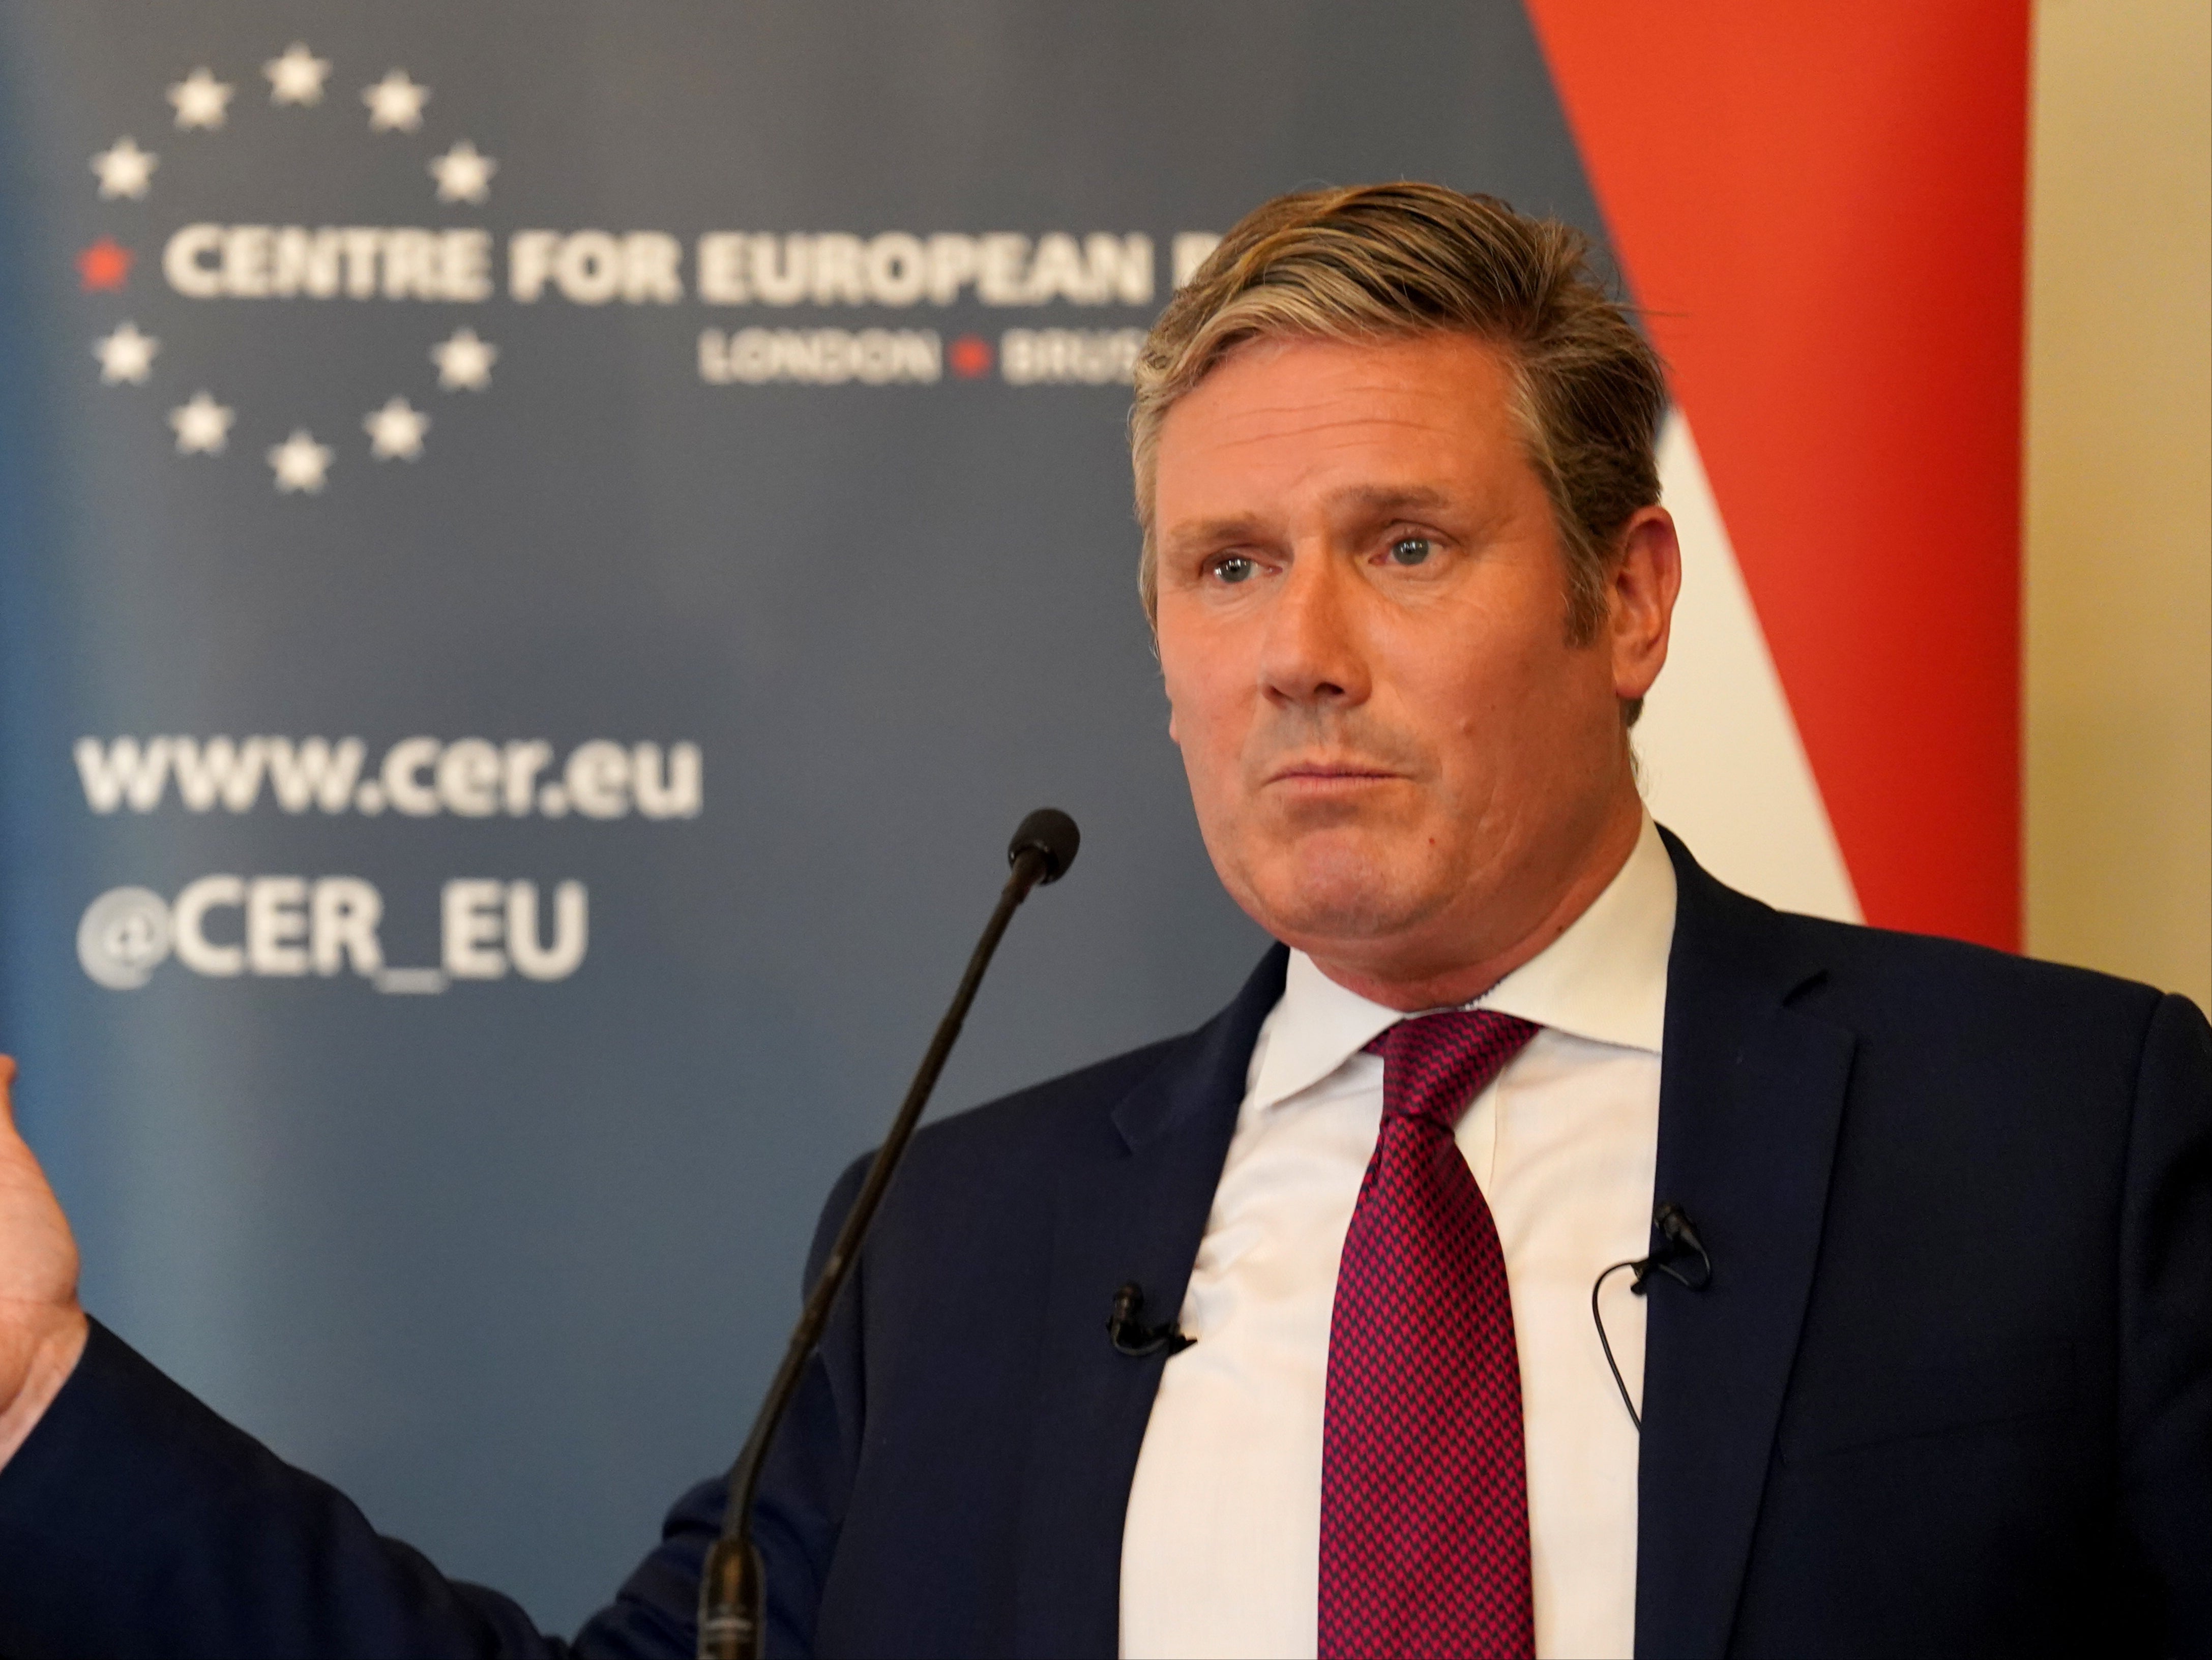 Keir Starmer has already ruled out rejoining the EU – but in office he would ‘lead from the front in transforming the post-Brexit relationship’